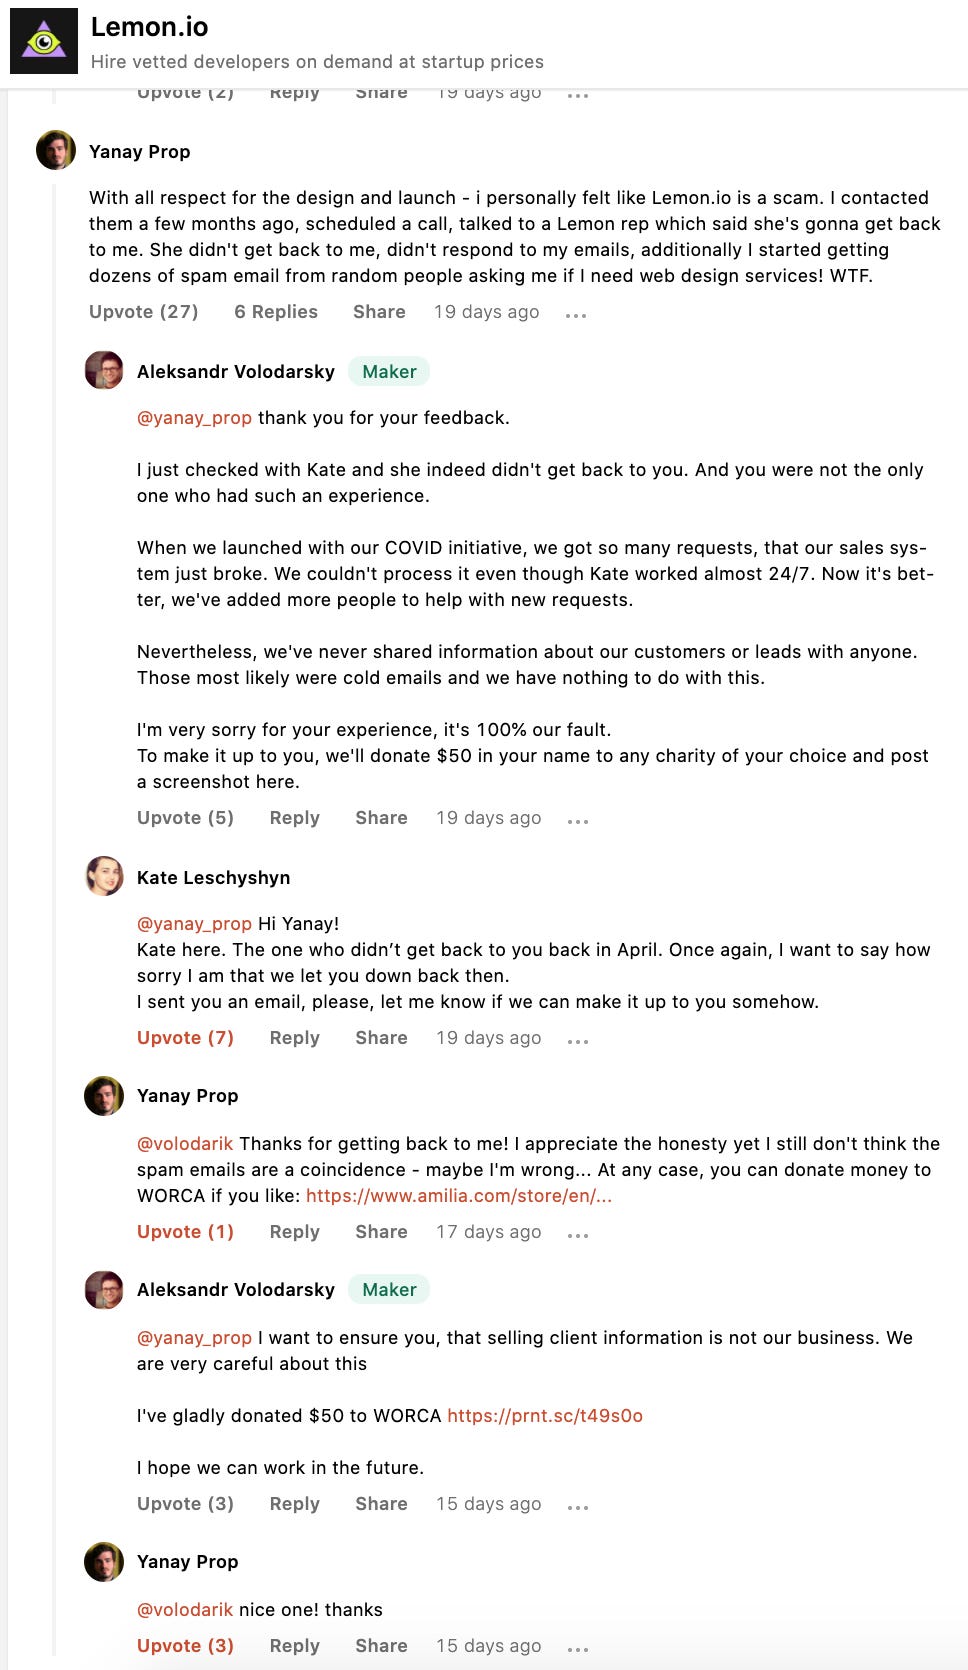 Comment on Product Hunt launch